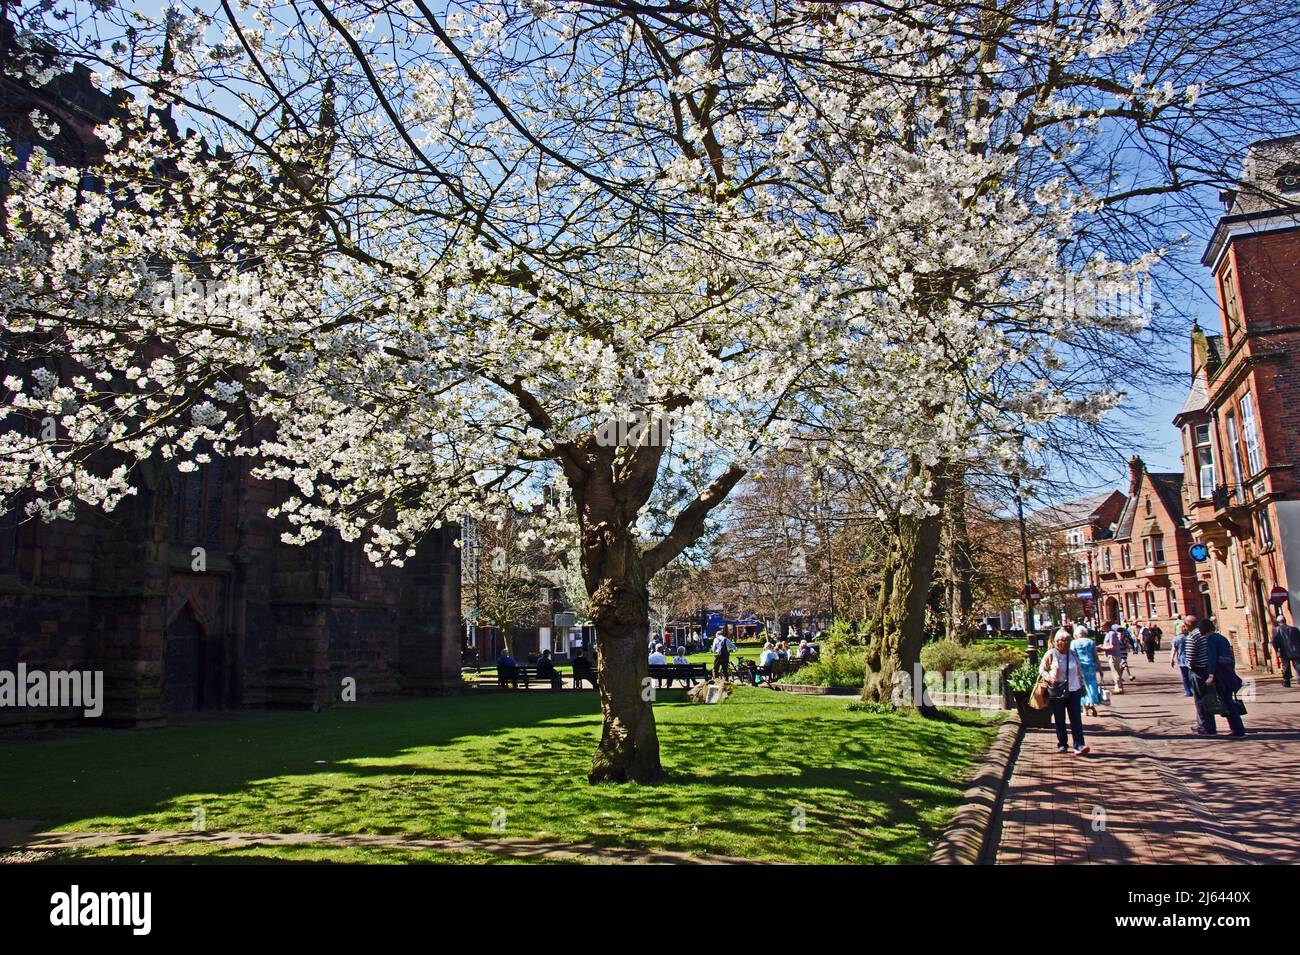 NANTWICH. CHESHIRE. ENGLAND.19-04-18. The town centre, St. Mary's Church, with trees in blossom. Stock Photo